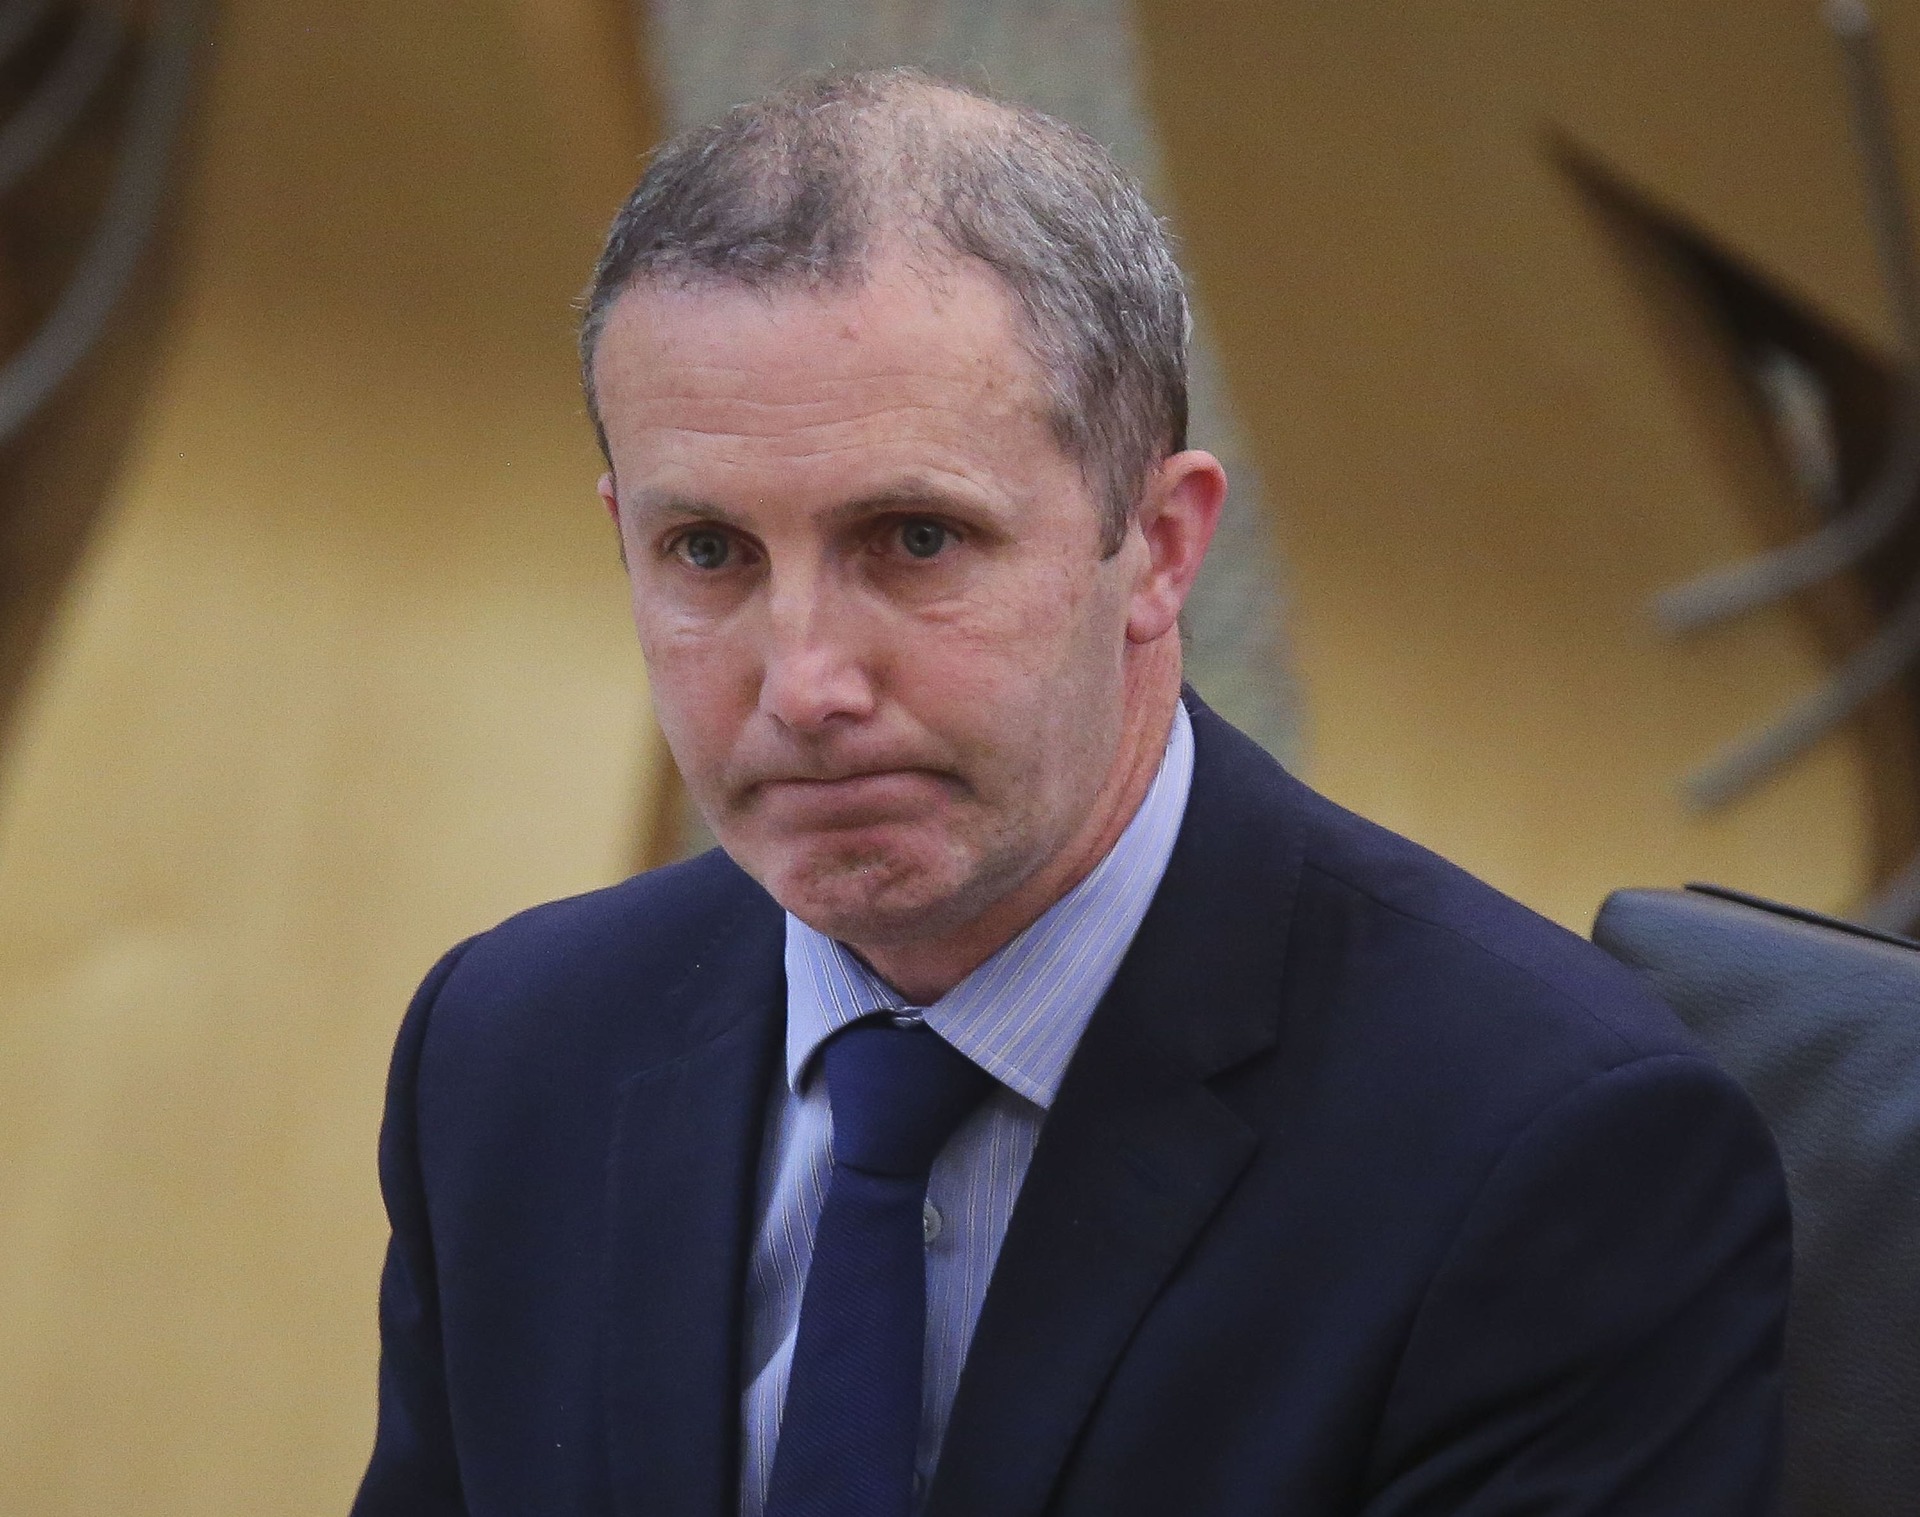 Health secretary Michael Matheson was questioned on delays to the construction of the Baird Family Hospital and the Anchor Centre in Aberdeen.